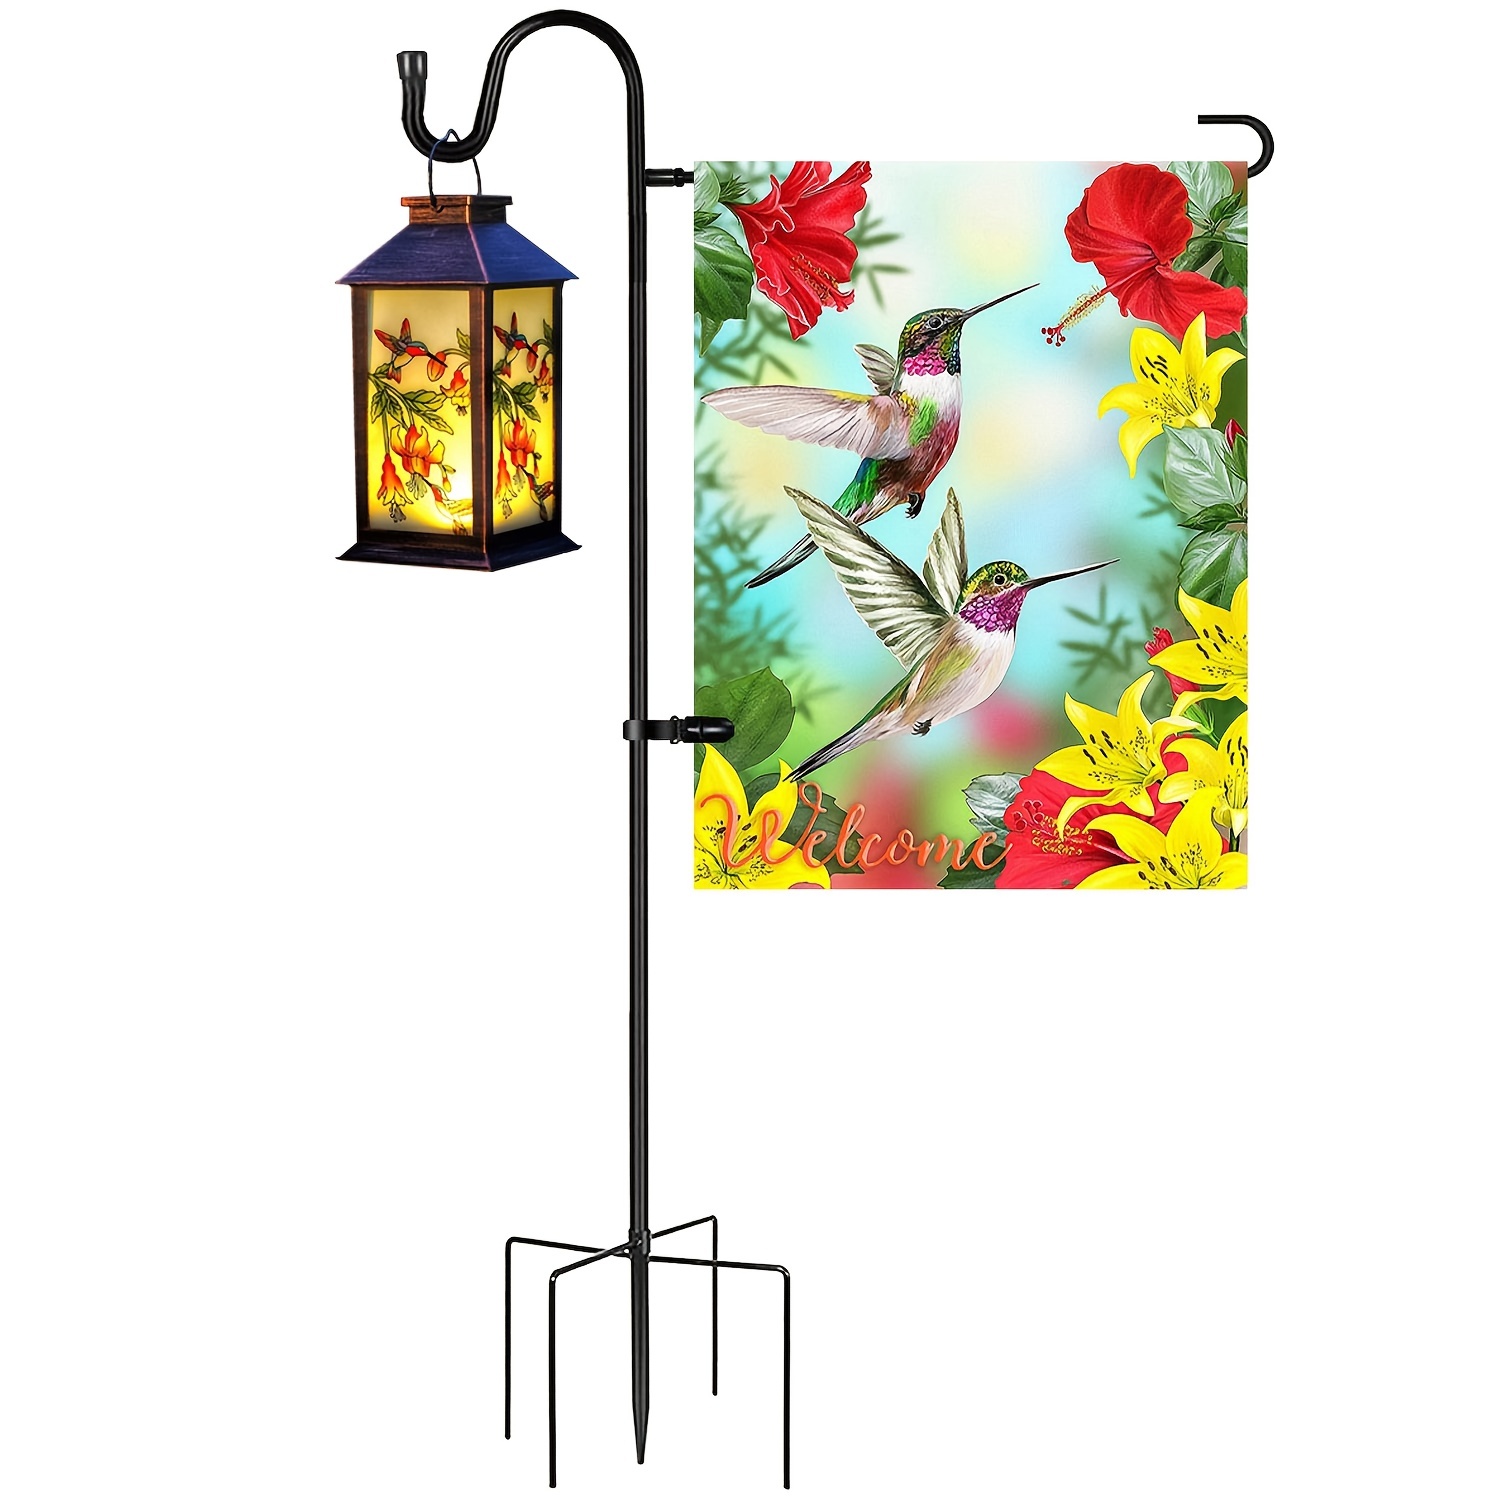 

1pc Upgraded 47 Inches Yard Garden Flag Holder With Anti-wind Clip, Garden Flag Holder Stand With Hook, Shepherd Hooks With Flag Holder For Flag, Yard Solar Lights, Wreath, And Decorations